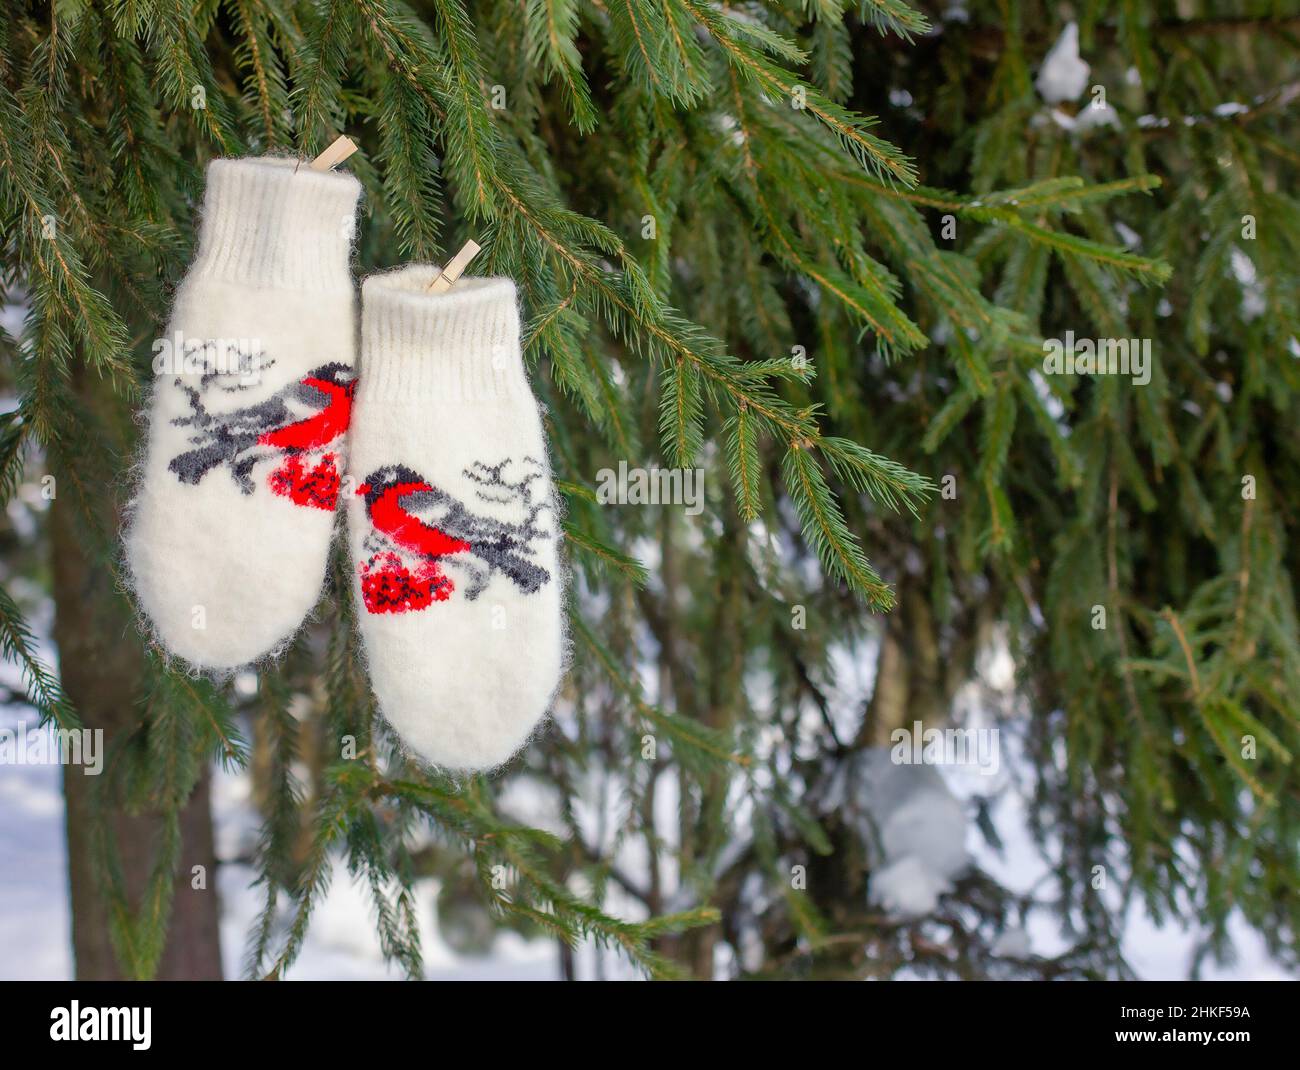 beautiful woolen knitted mittens with bullfinch embroidery hang on clothespins, spruce background. the concept of warmth and comfort. Stock Photo